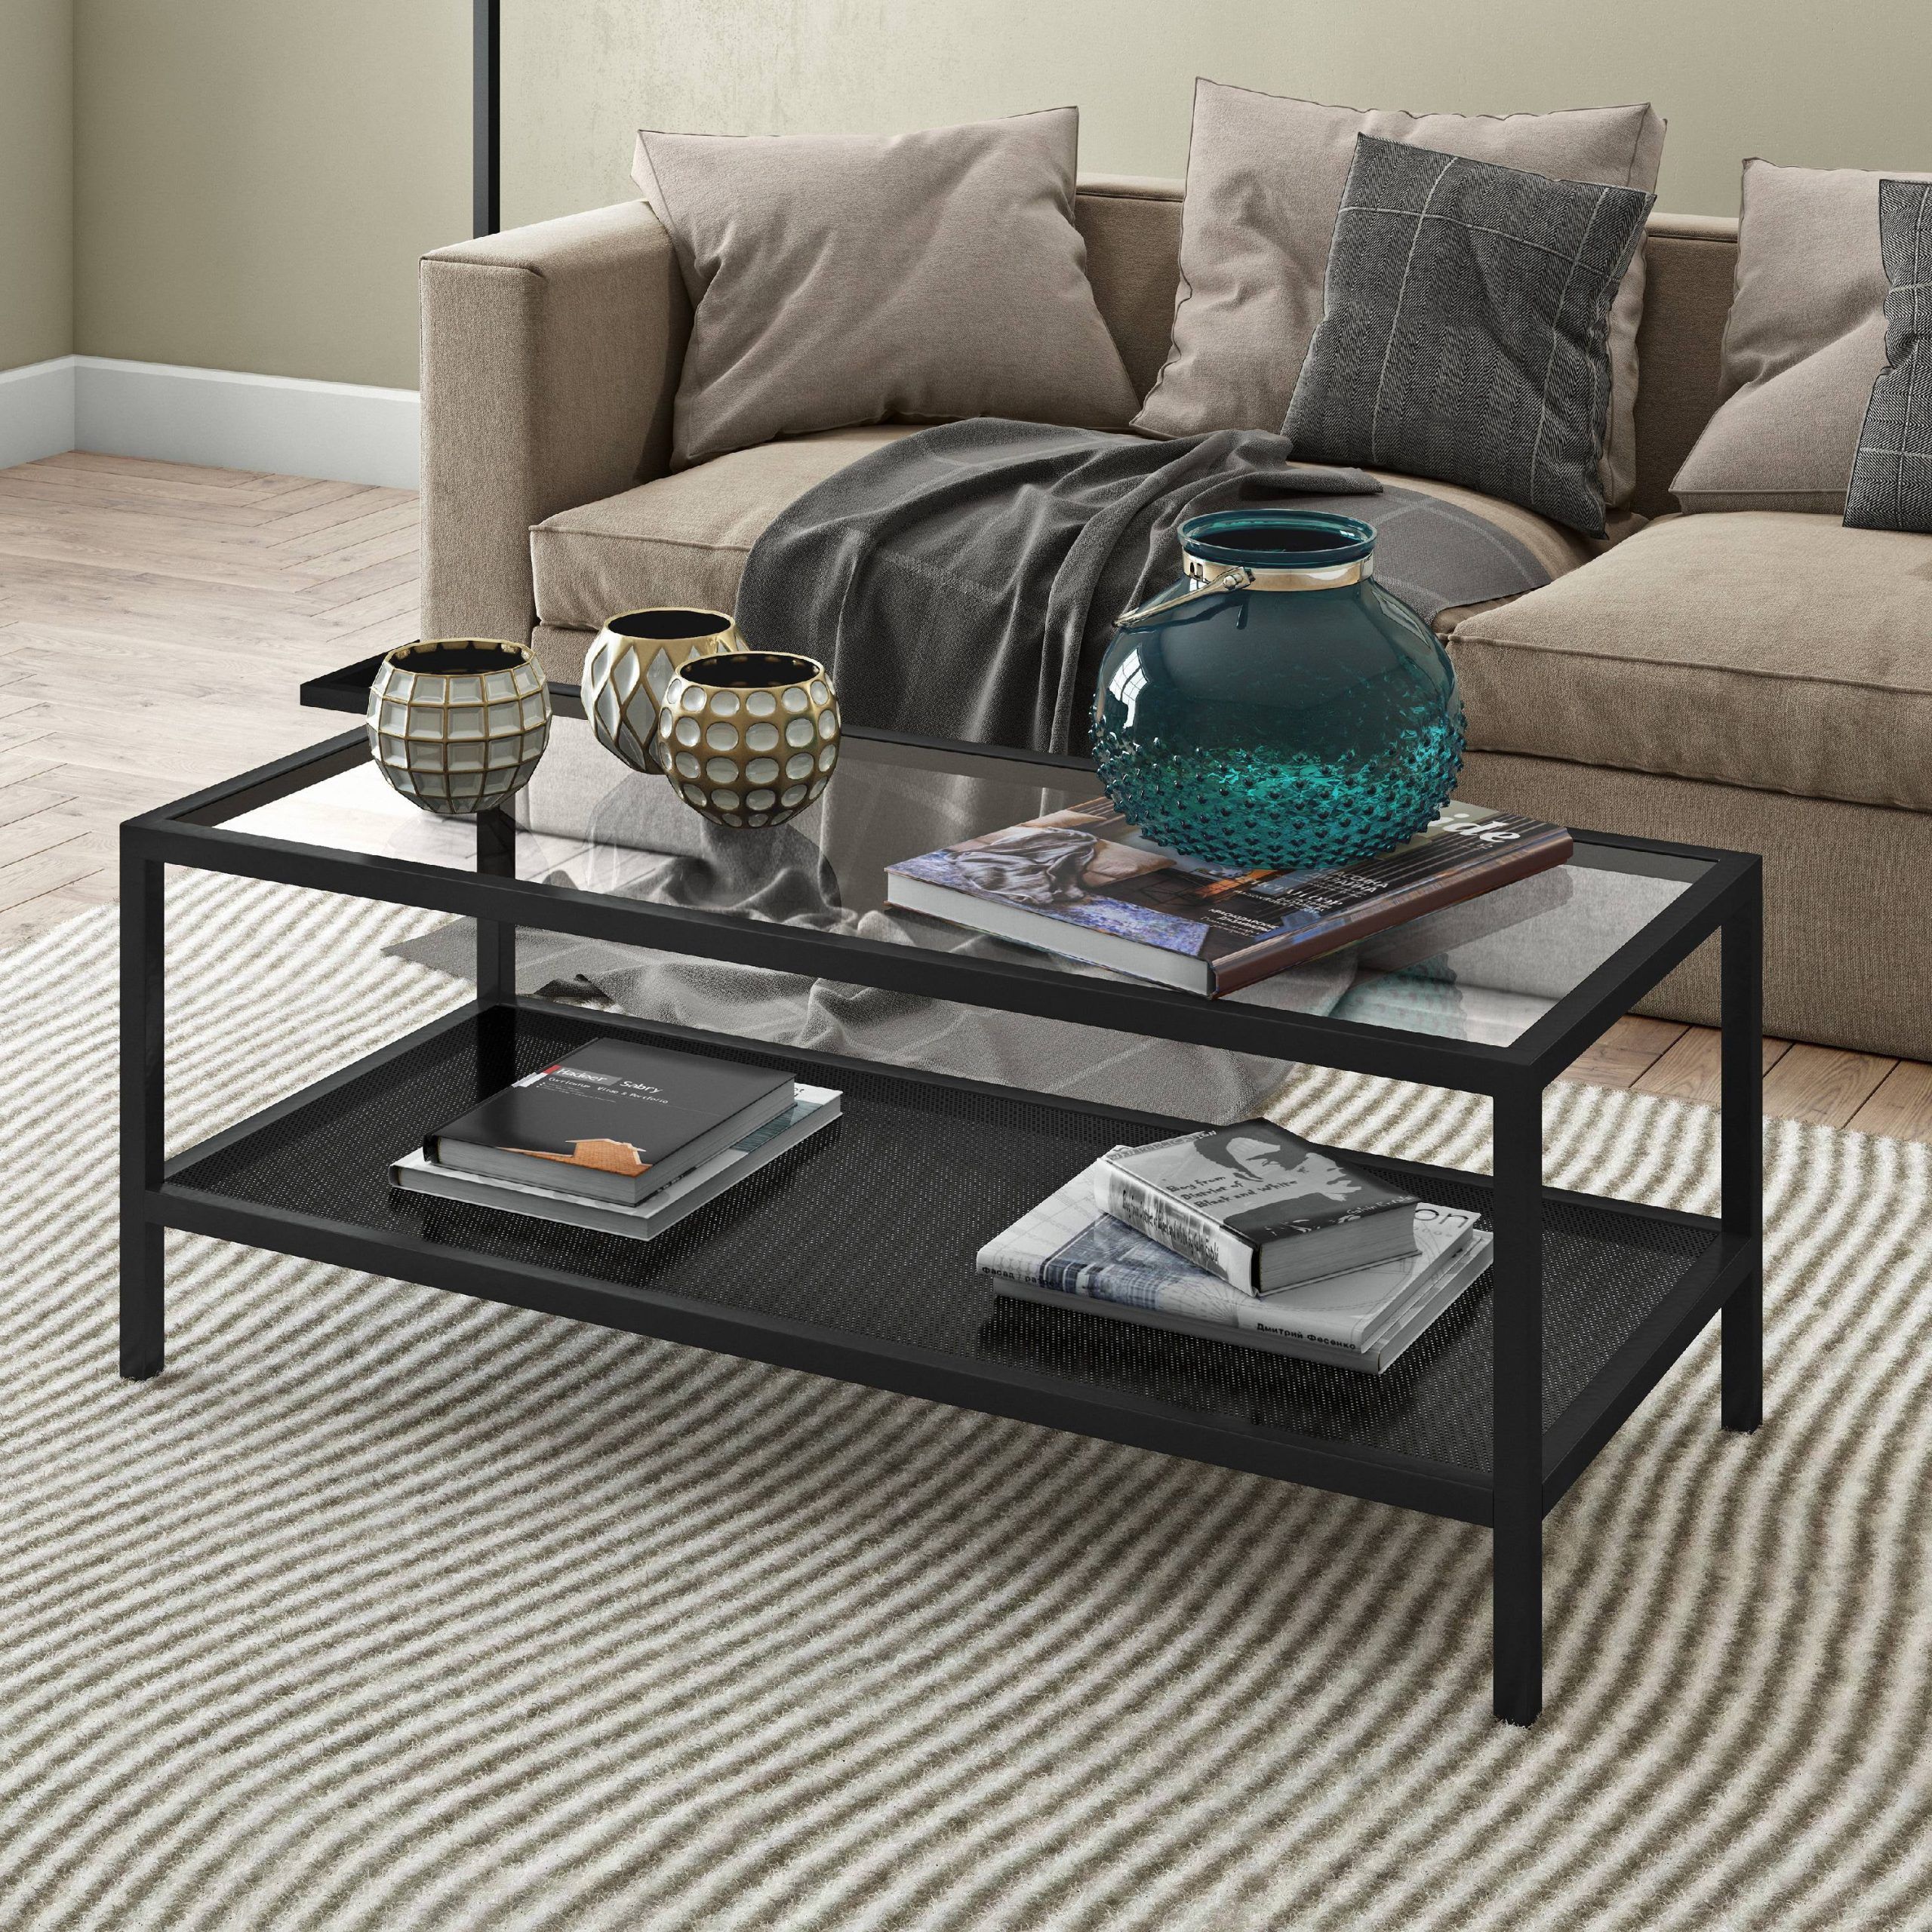 Evelyn&zoe Contemporary Metal Coffee Table With Glass Top – Walmart Pertaining To Metal 1 Shelf Coffee Tables (View 3 of 15)